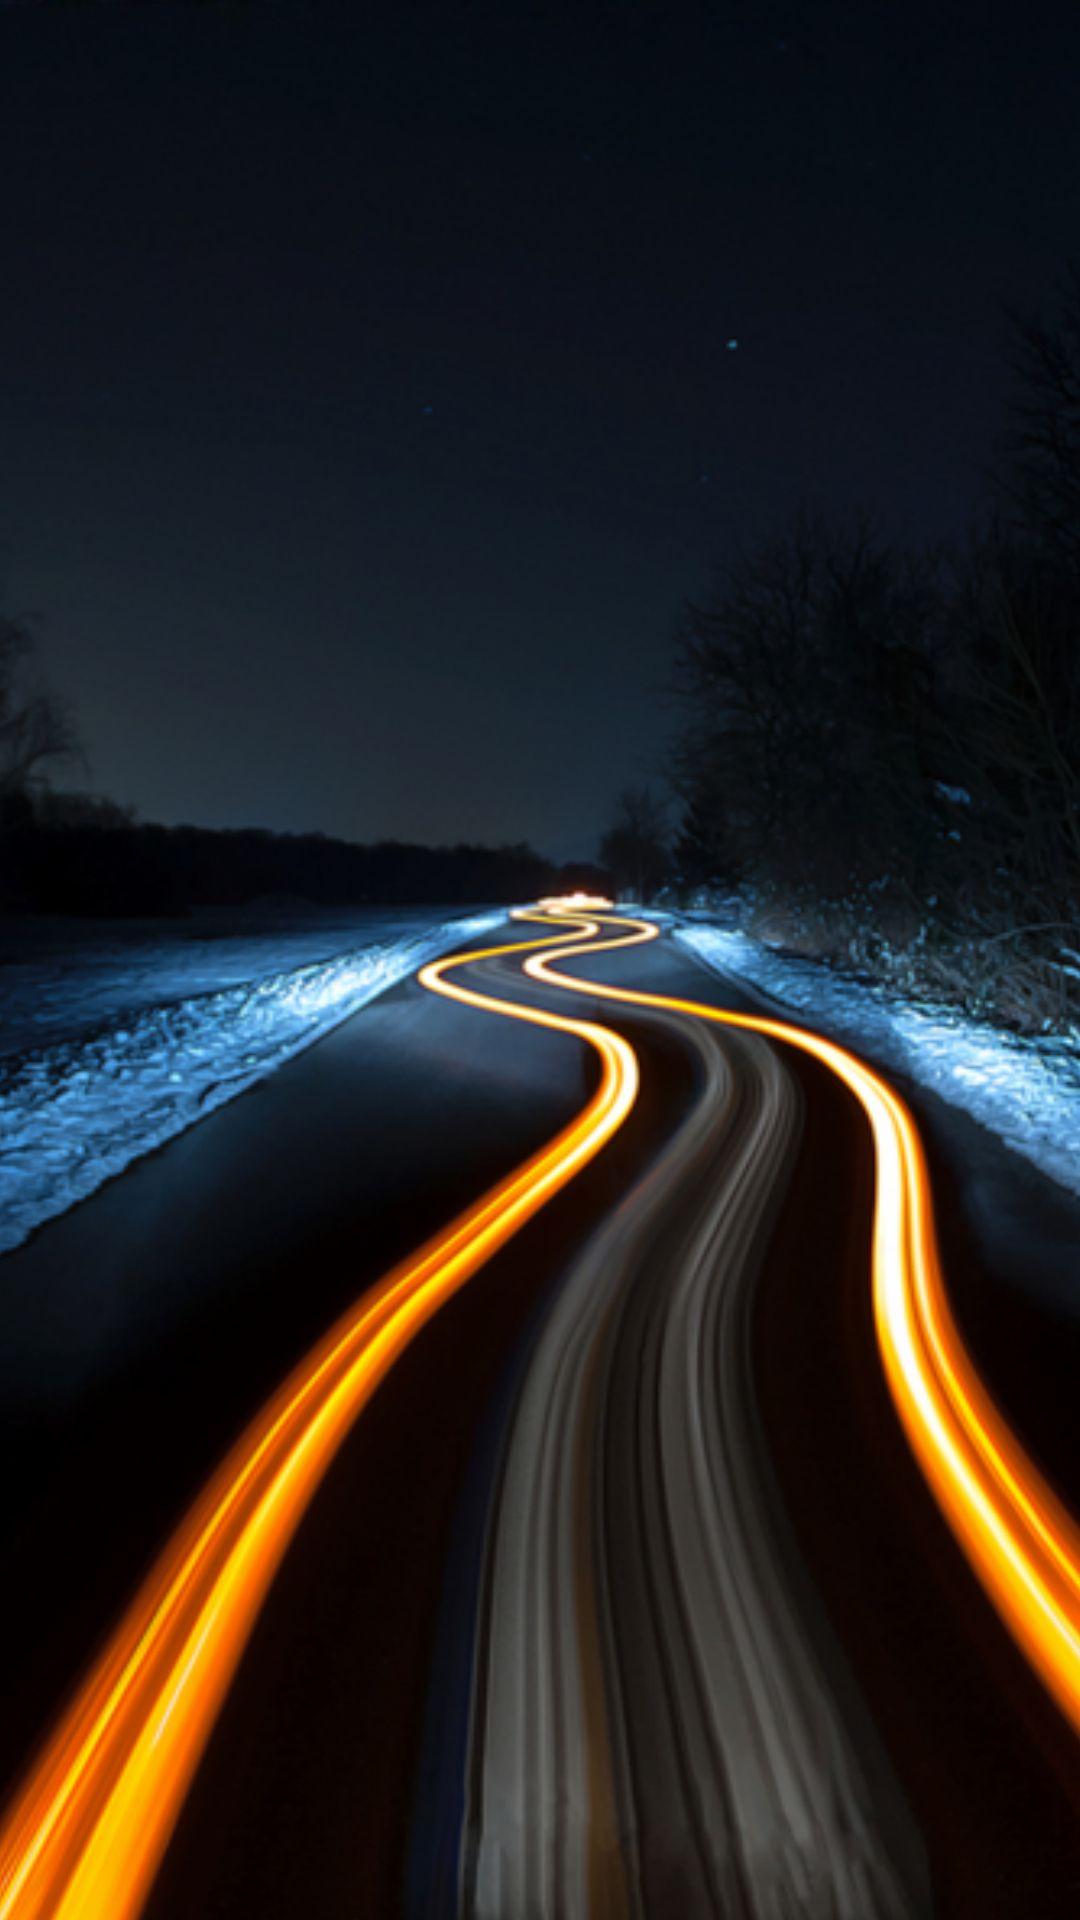 Long Exposure on the road #photography #neat. Light